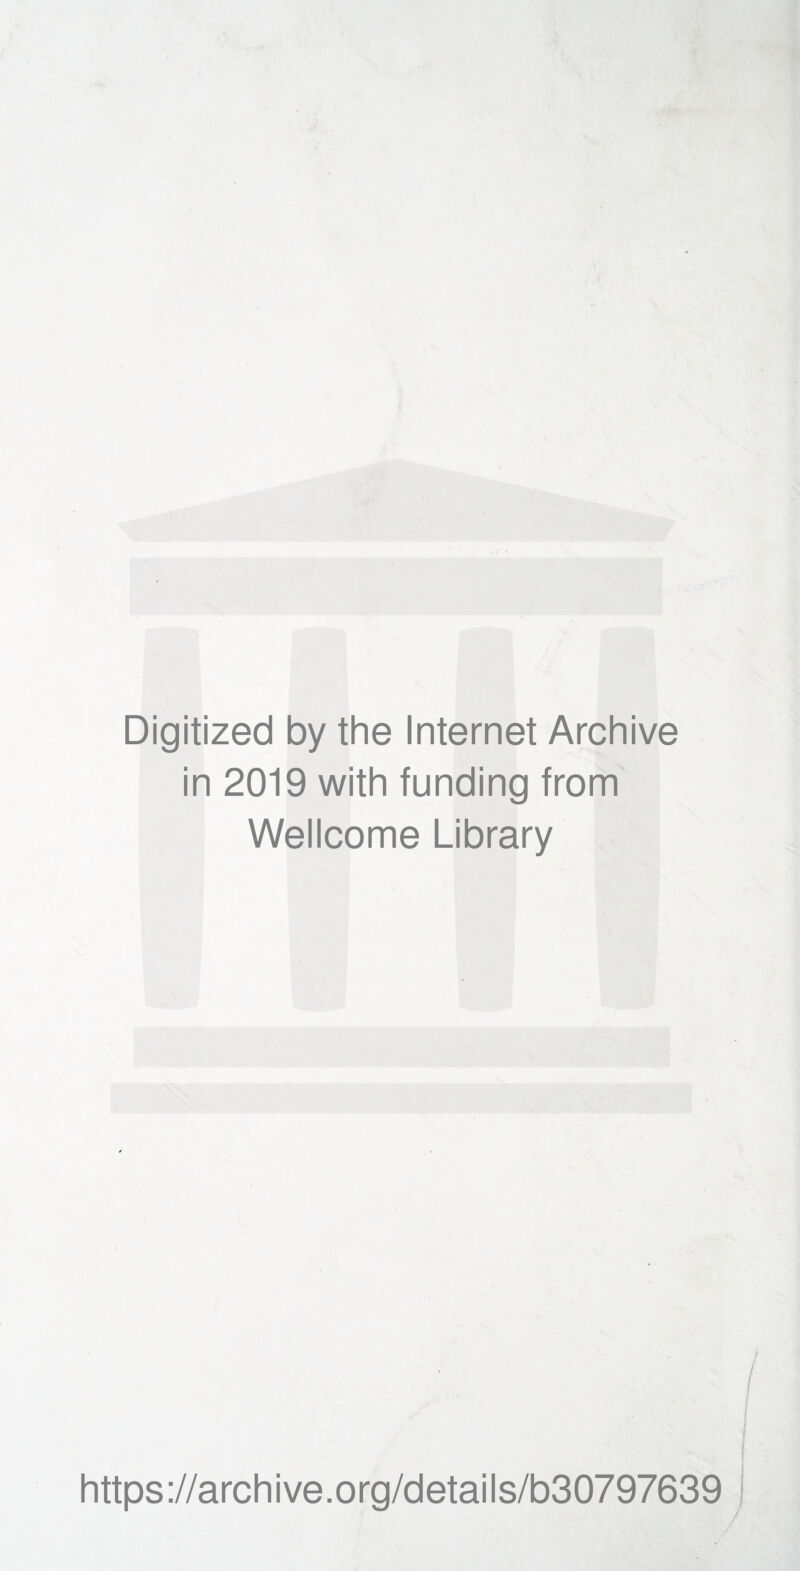 Digitized by the Internet Archive in 2019 with funding from Wellcome Library https://archive.org/details/b30797639